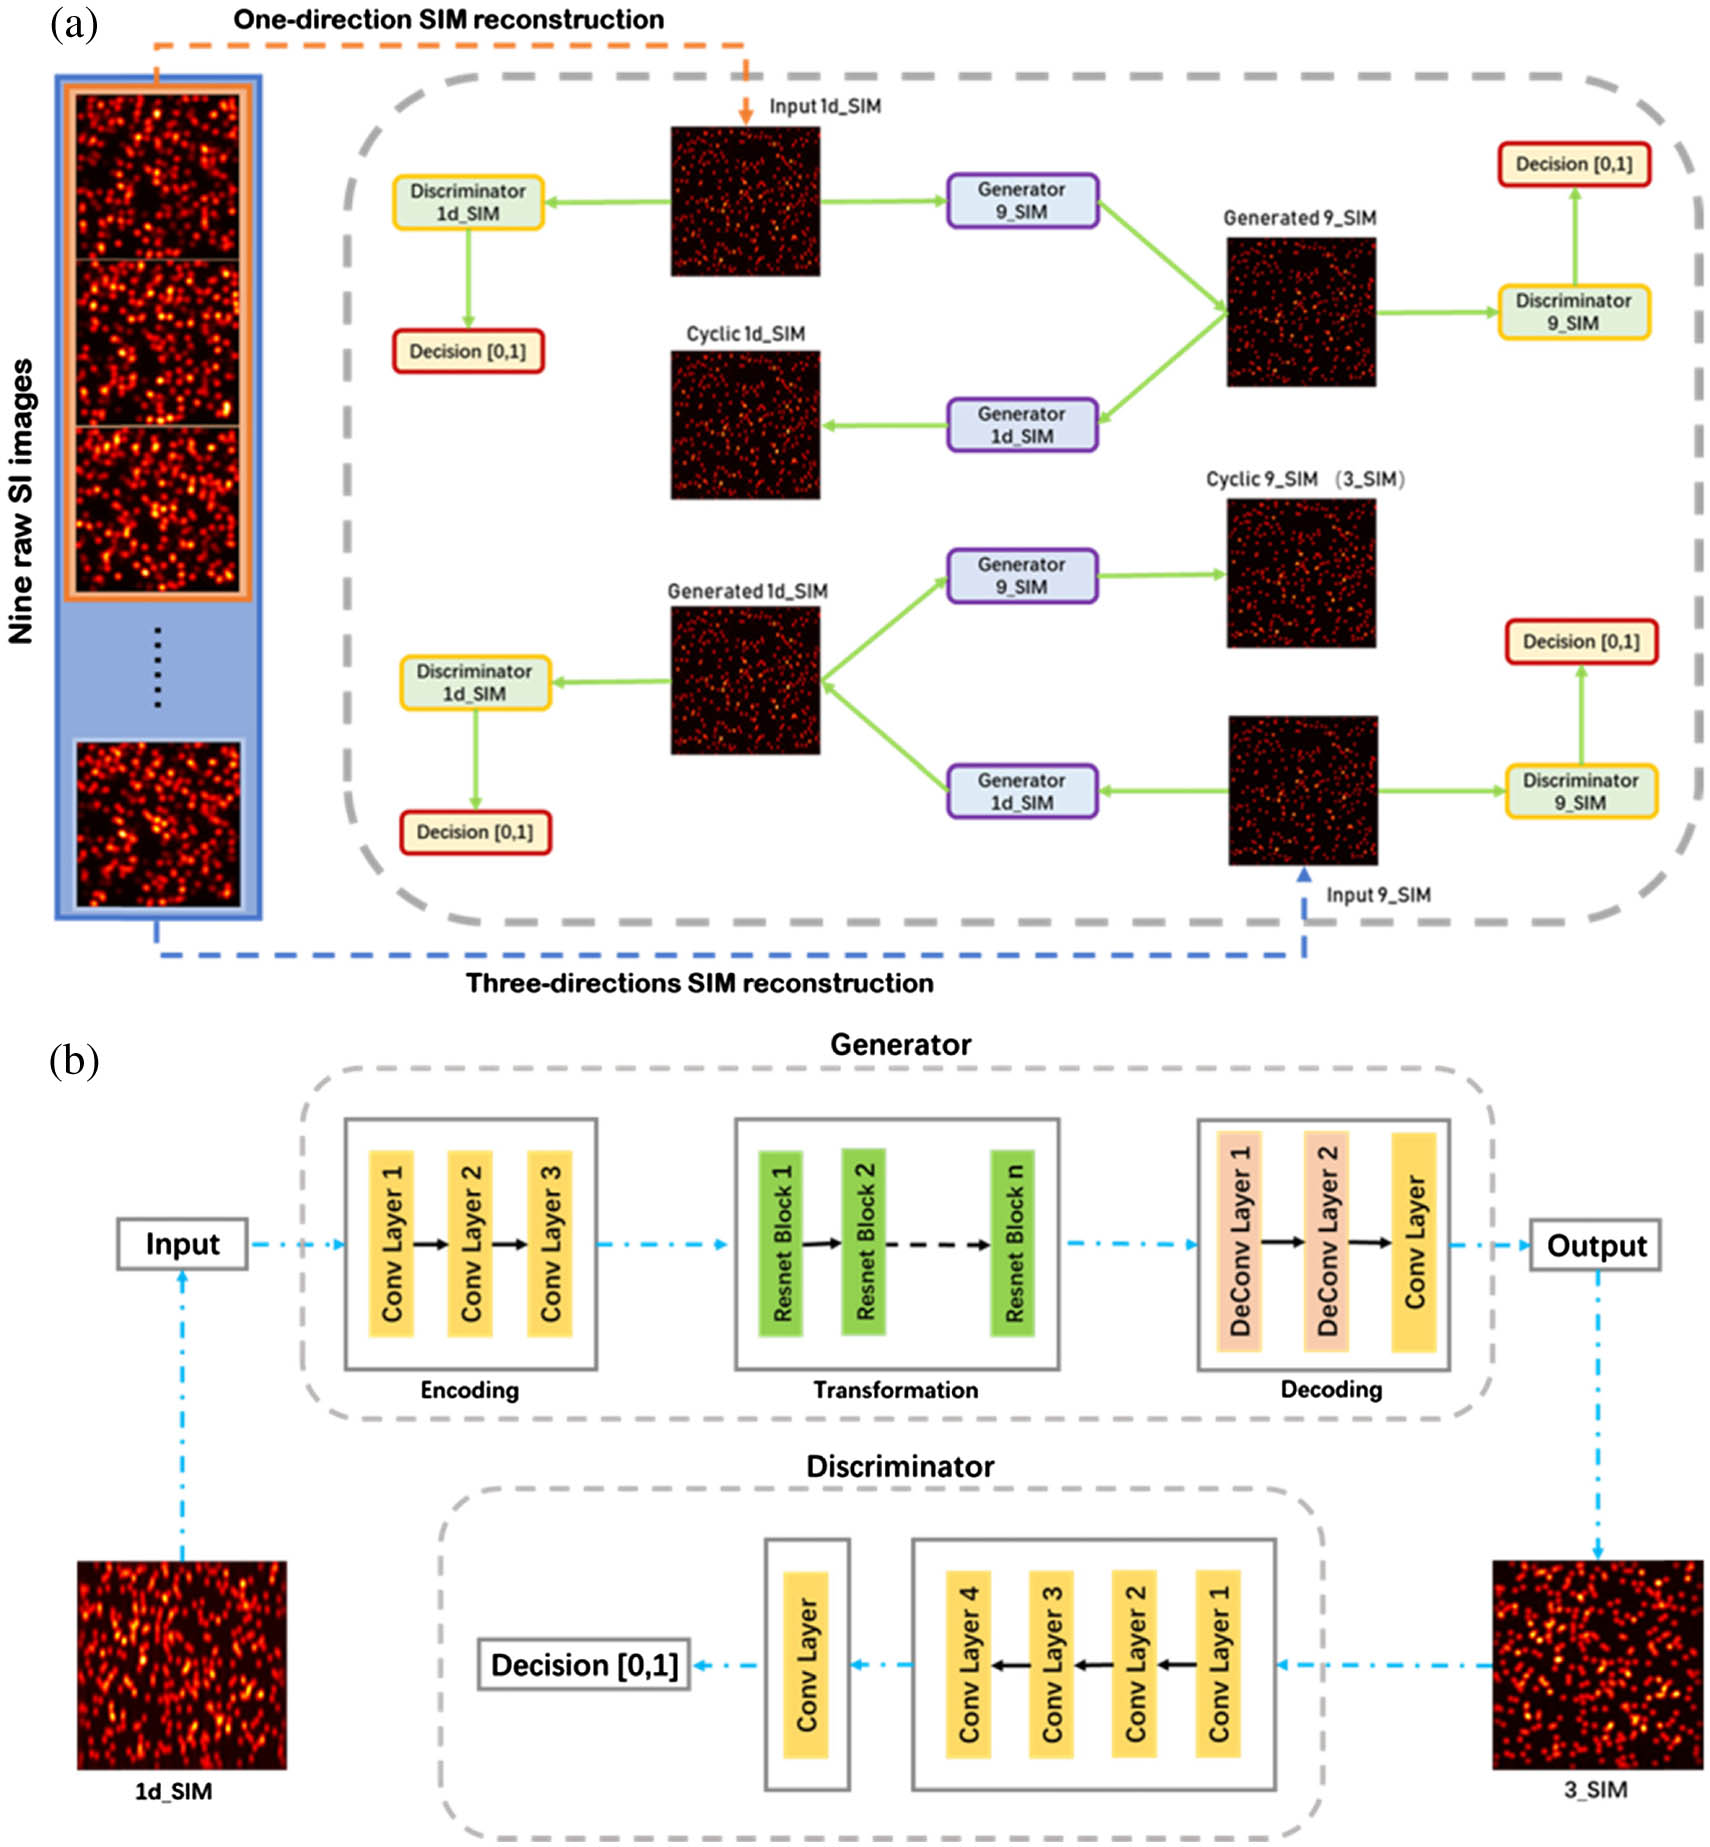 Schematics of the deep neural network trained for SIM imaging. (a) The inputs are 1d_SIM and 9_SIM images generated by nine lower-resolution raw images (using the SIM algorithm) as two training datasets with different training labels. The deep neural network features two generators and two discriminators. These generators and discriminators are trained by optimizing various parameters to minimize the adversarial loss between the network’s input and output as well as cycle consistency loss between the network’s input image and the corresponding cyclic image. The cyclic 9_SIM in the schematics is the final image (3_SIM) desired. (b) Detailed schematics of half of the CycleGAN training phase (generator 1d_SIM and discriminator 9_SIM). The generator consists of three parts: an encoder (which uses convolution layers to extract features from the input image), a converter (which uses residual blocks to combine different similar features of the image), and a decoder (which uses the deconvolution layer to restore the low-level features from the feature vector), realizing the functions of encoding, transformation, and decoding. The discriminator uses a 1D convolution layer to determine whether these features belong to that particular category. The other half of the CycleGAN training phase (generator 9_SIM and discriminator 1d_SIM) is the same as this.